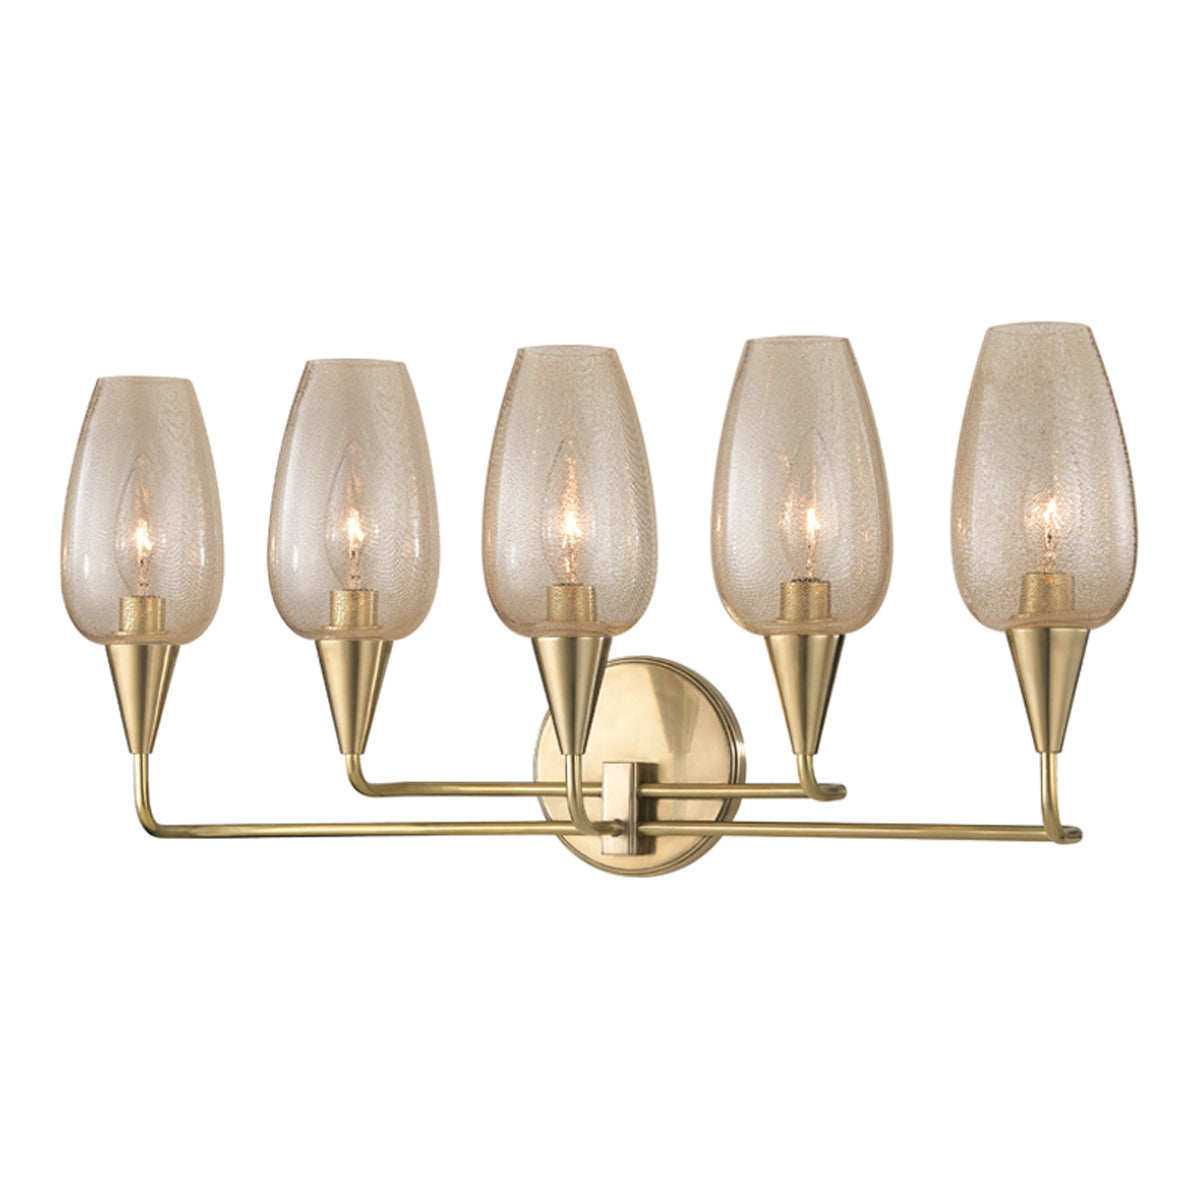 Longmont 5-Light Wall Sconce - Lamps Expo